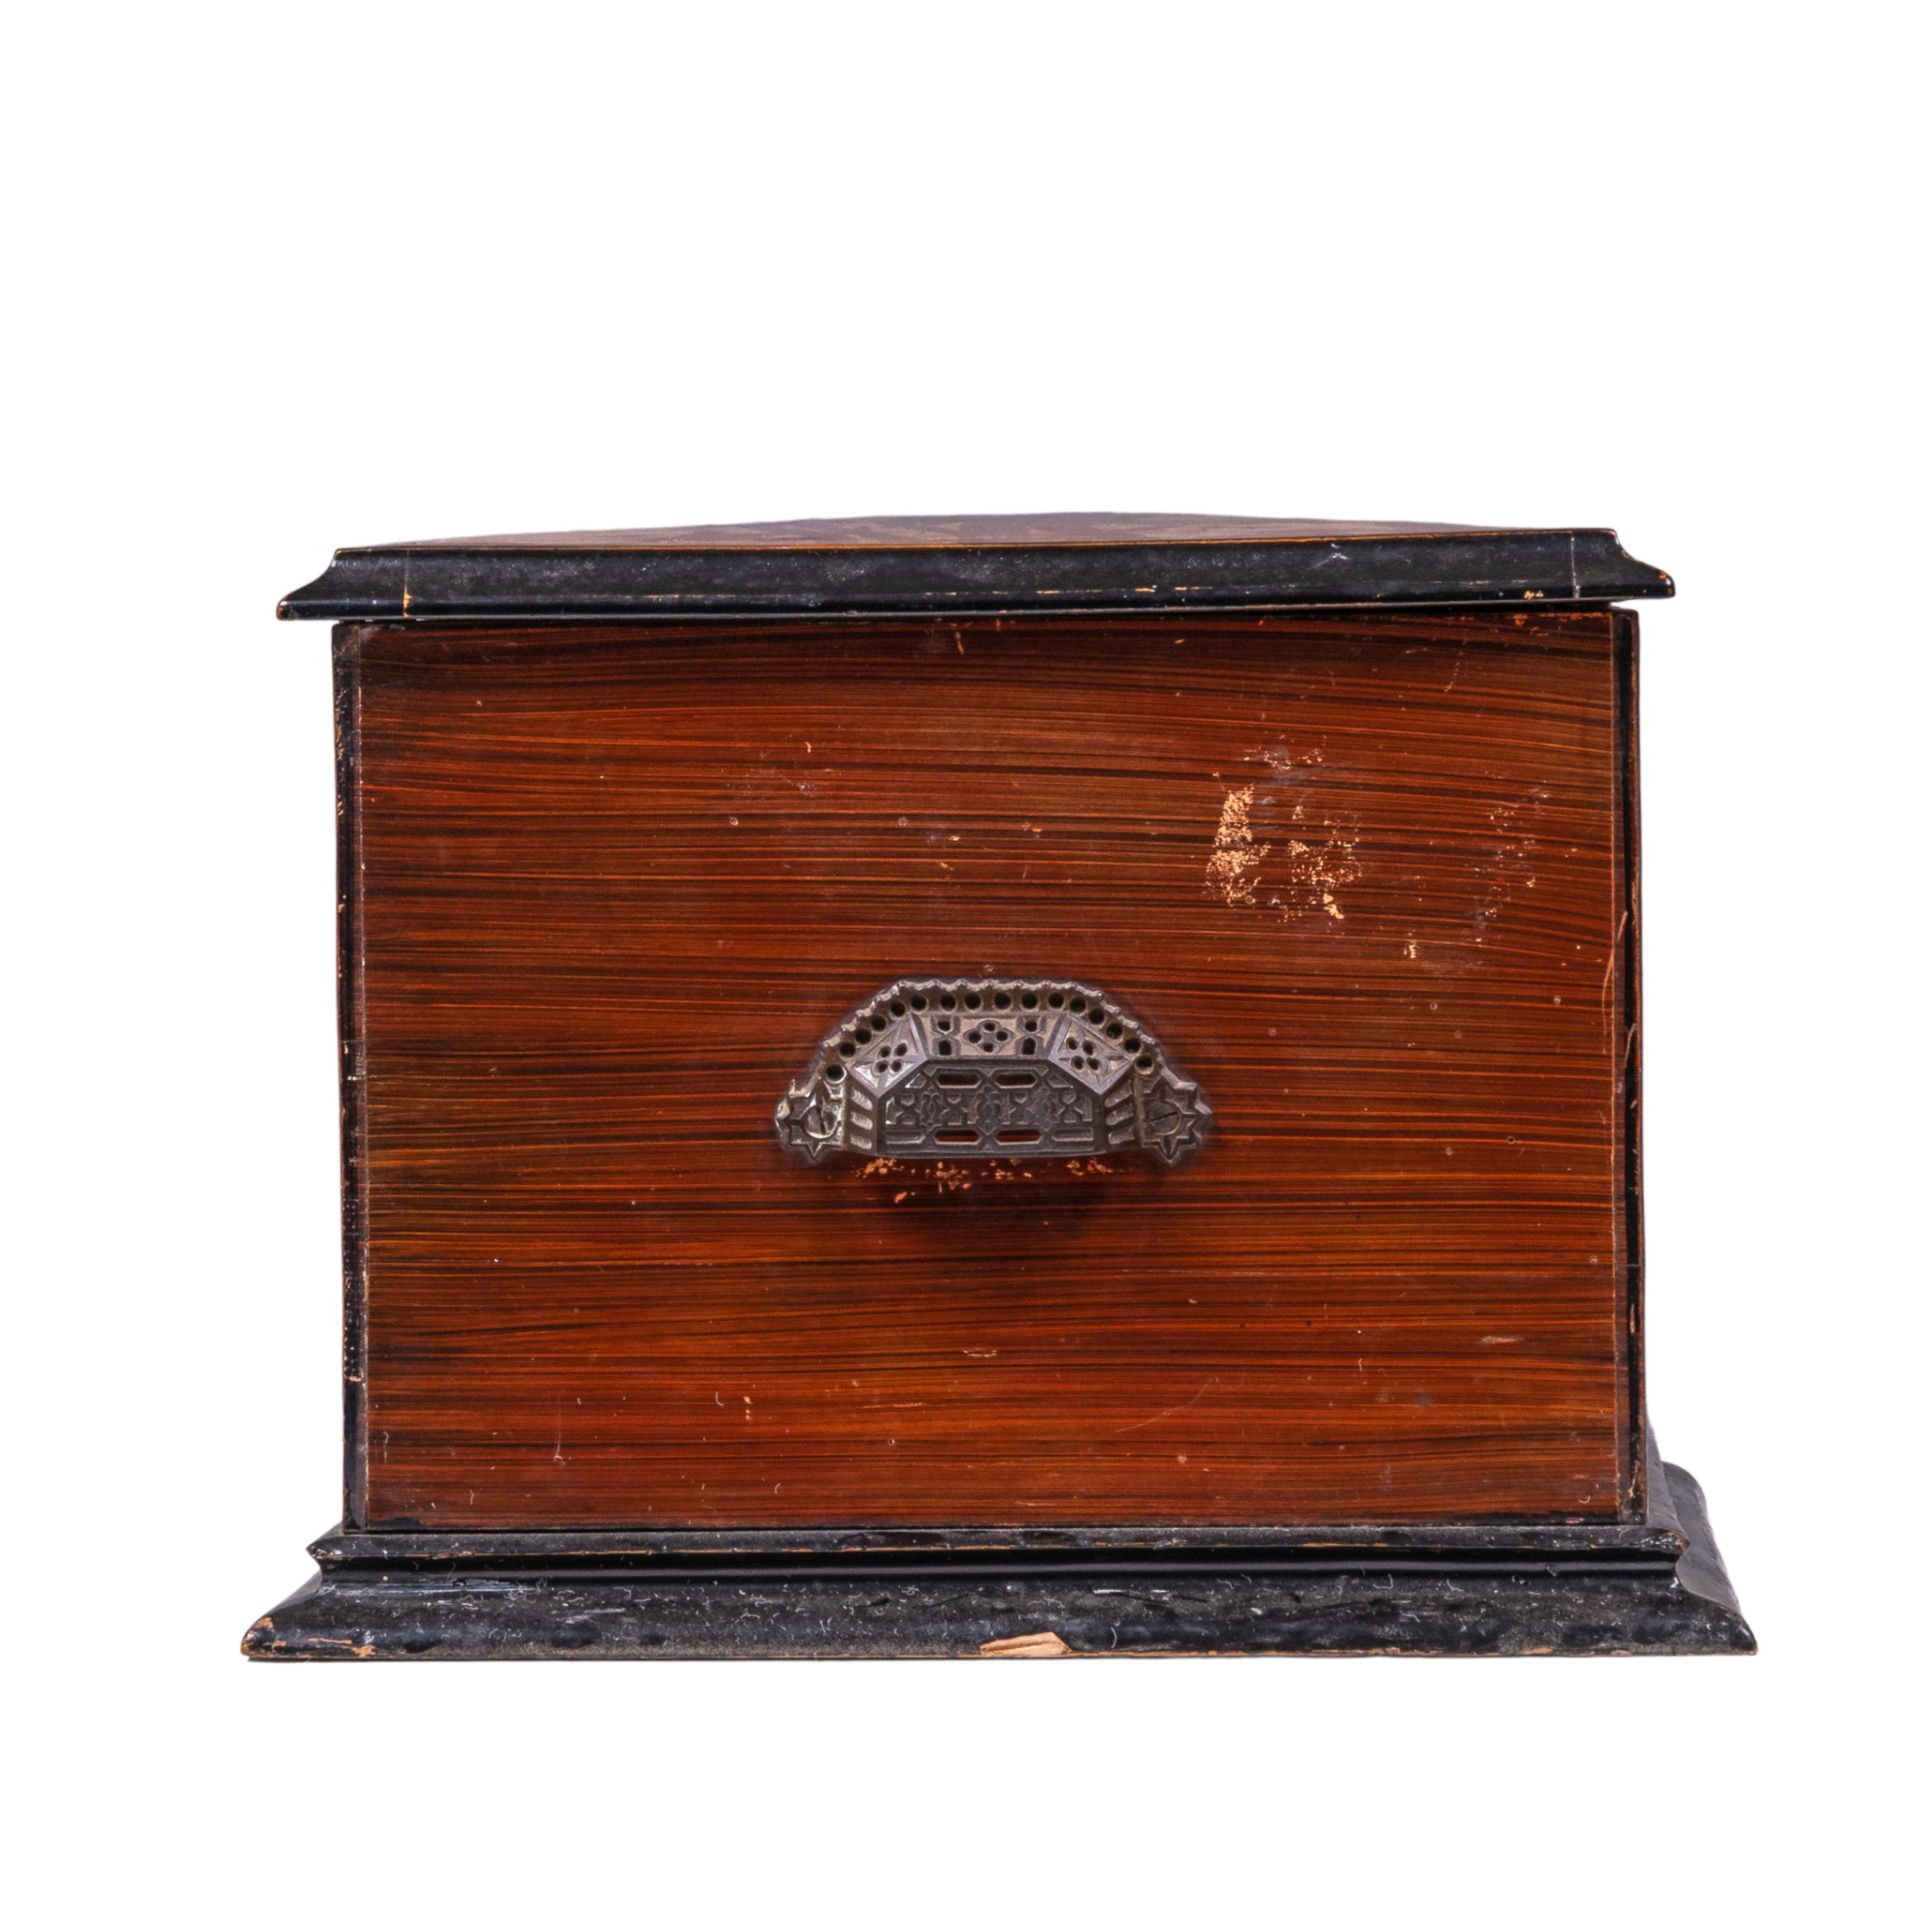 A Victorian mahogany and rosewood veneered cylinder musical box, 1920s, H 28,5 - W 70- D 37 cm - Image 5 of 10